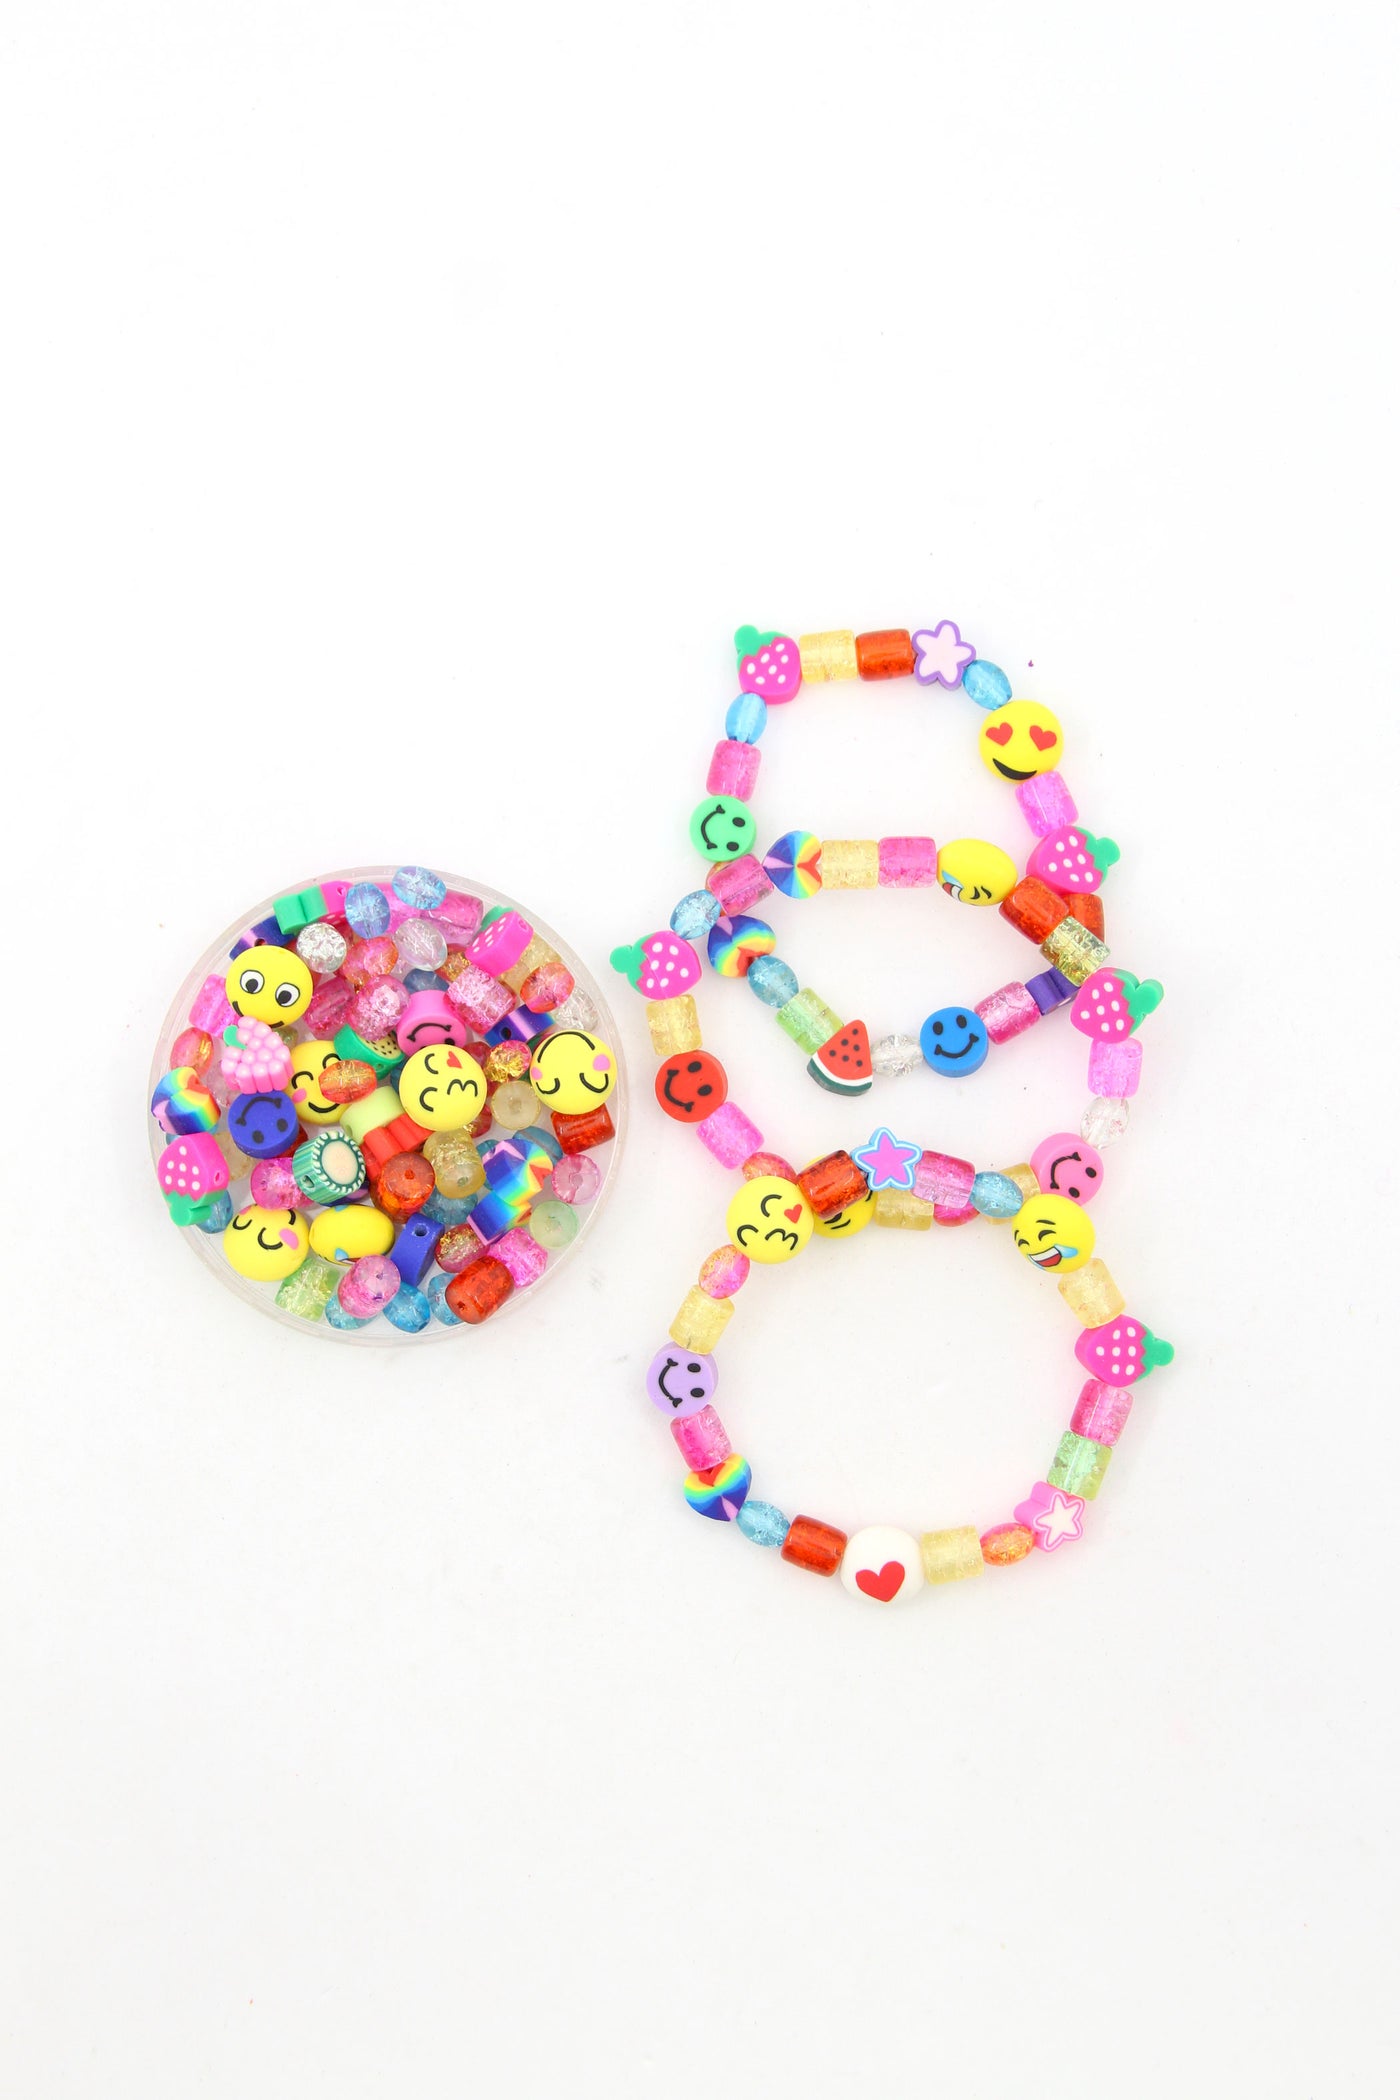 How to Make Friendship Bracelets with Beads